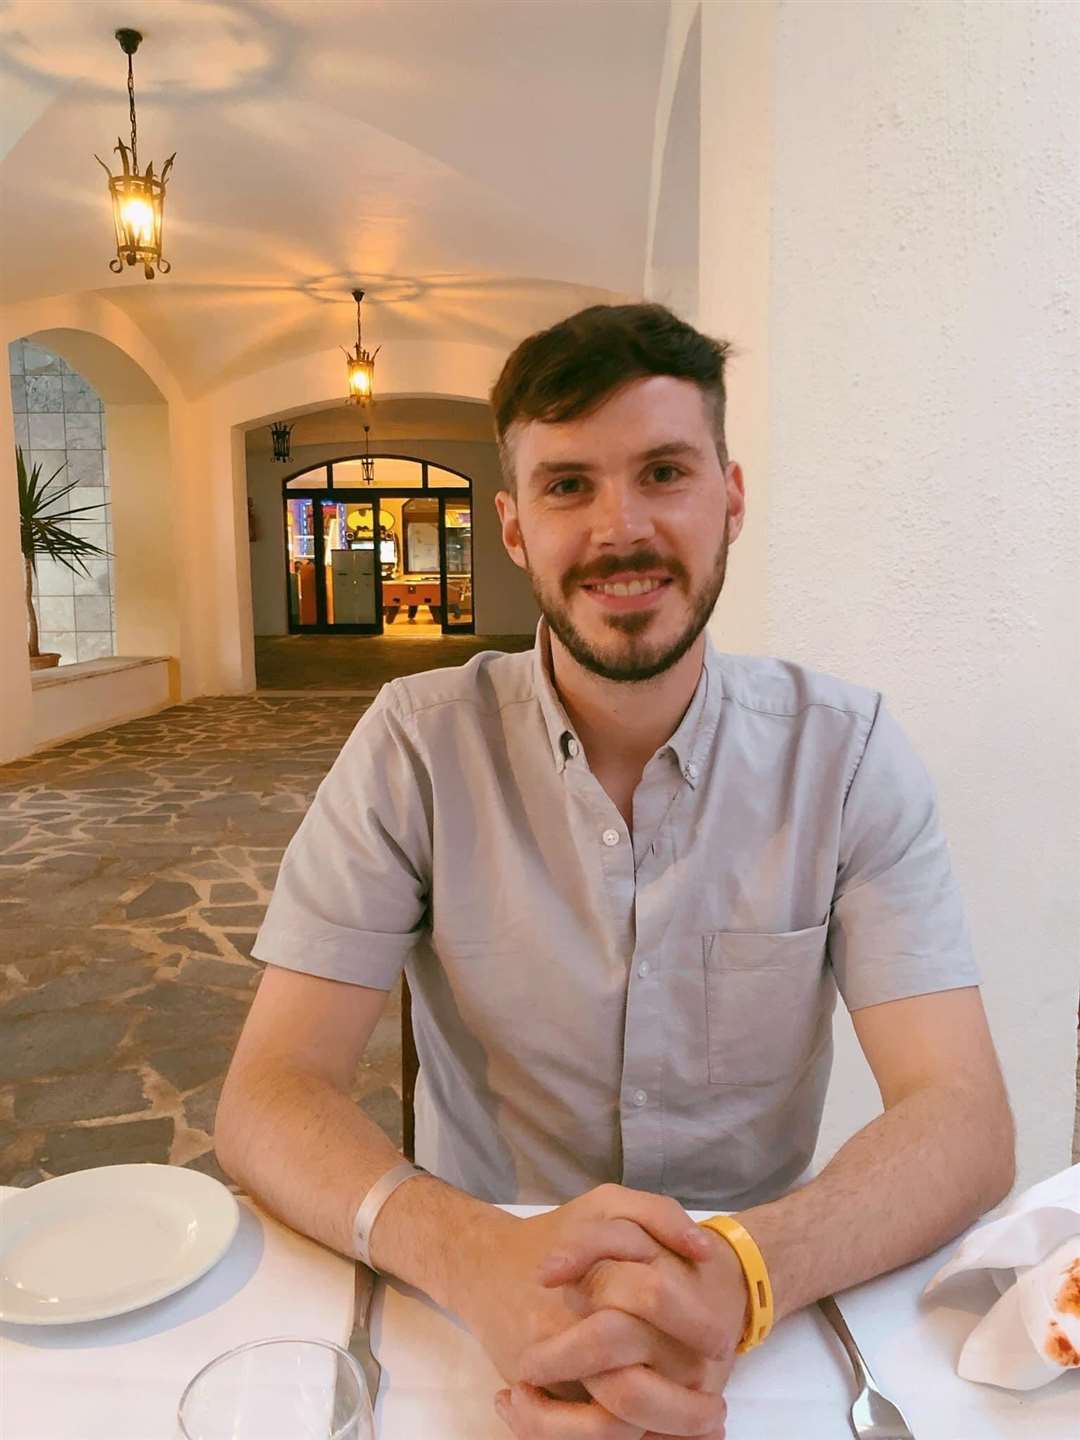 See Me volunteer Jamie Donoghue is encouraging people from across the Highlands to take part in Time to Talk Day 2022 by starting a simple conversation about mental health.